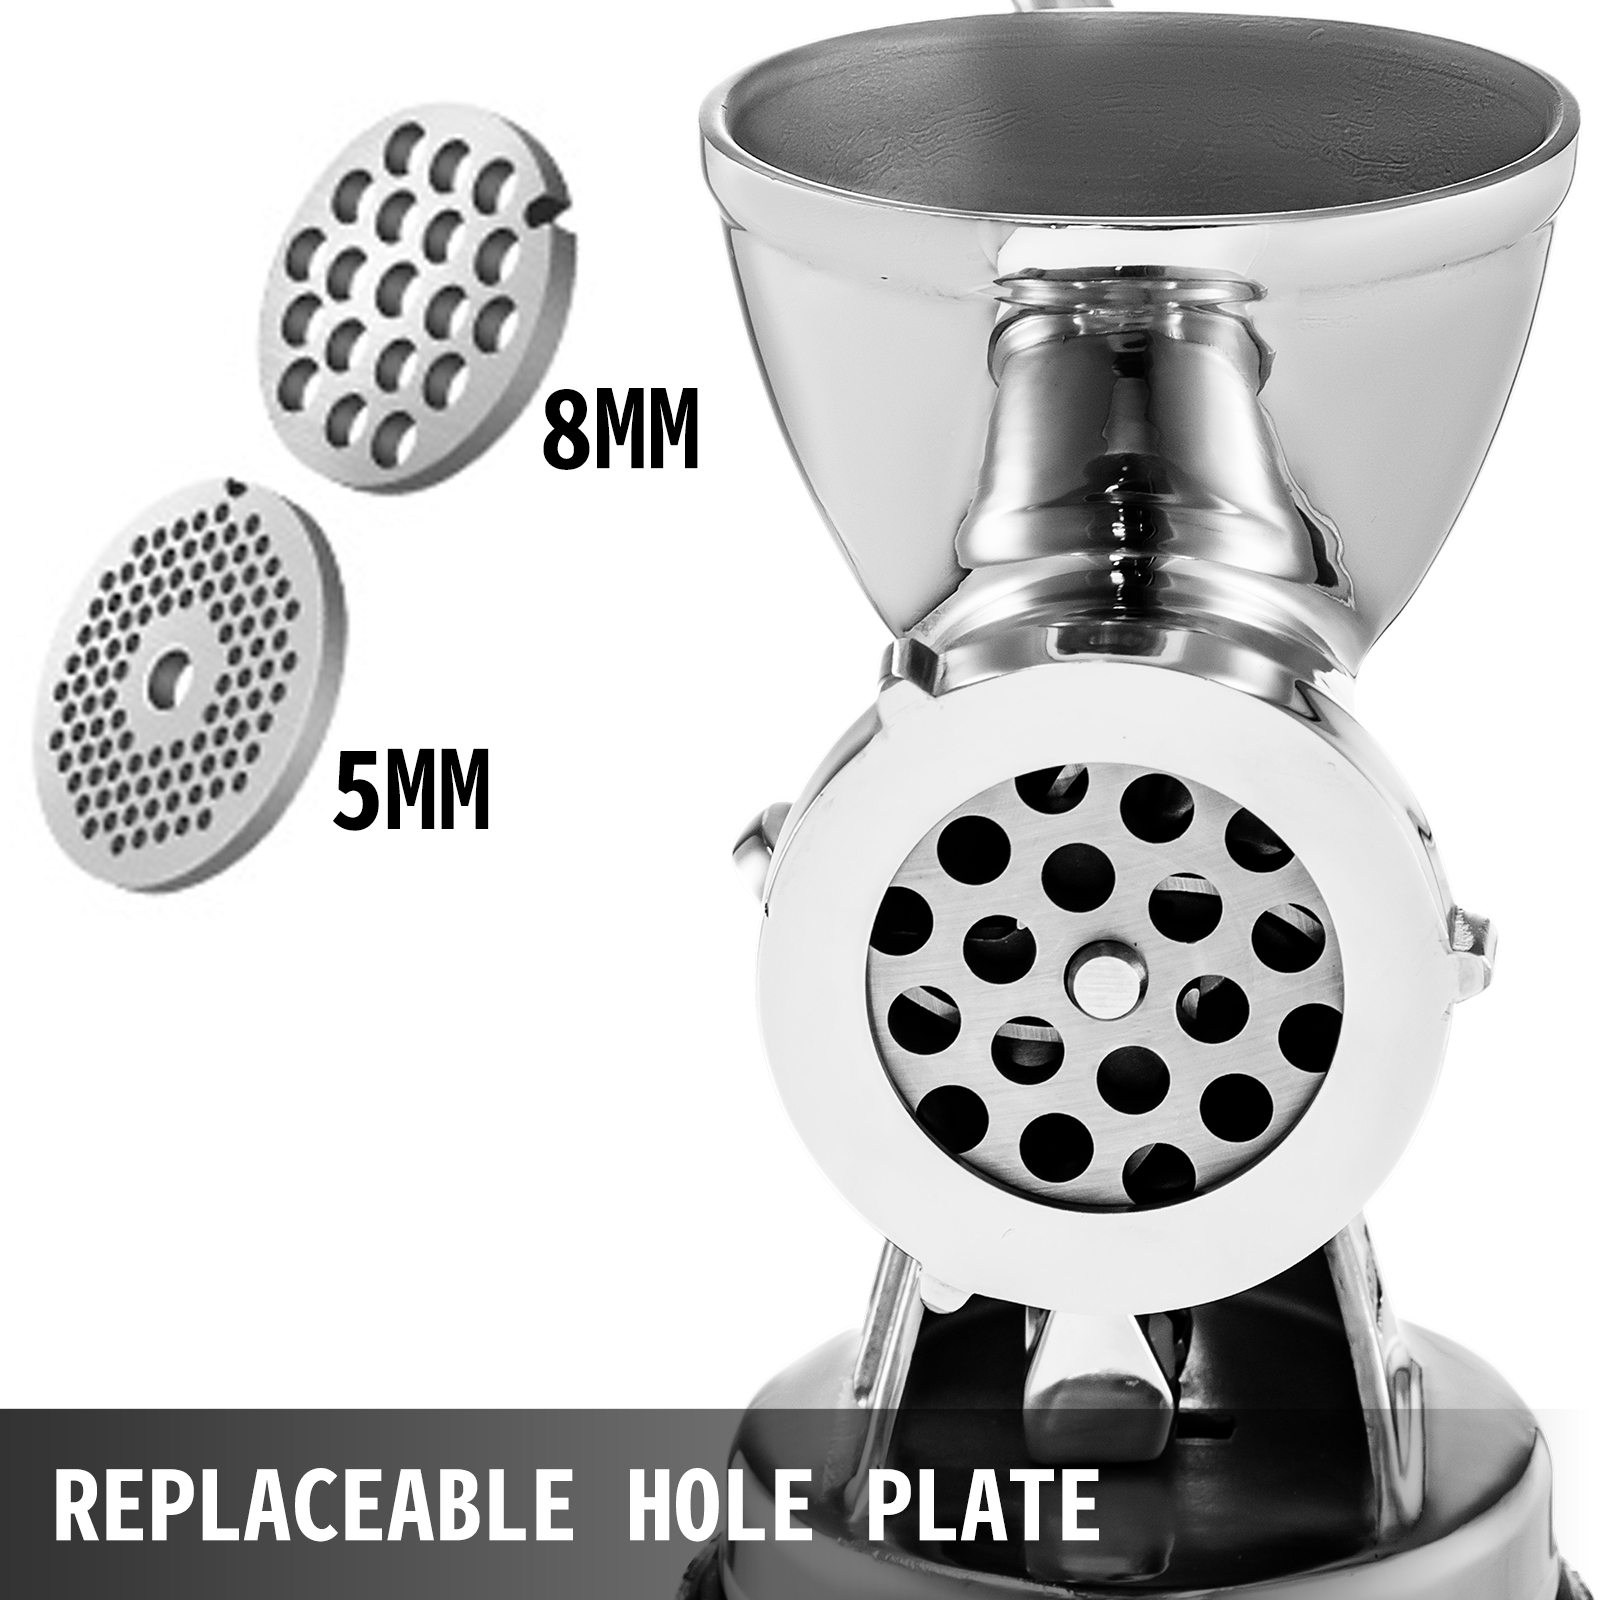 manual meat grinder, stainless steel, suction cup